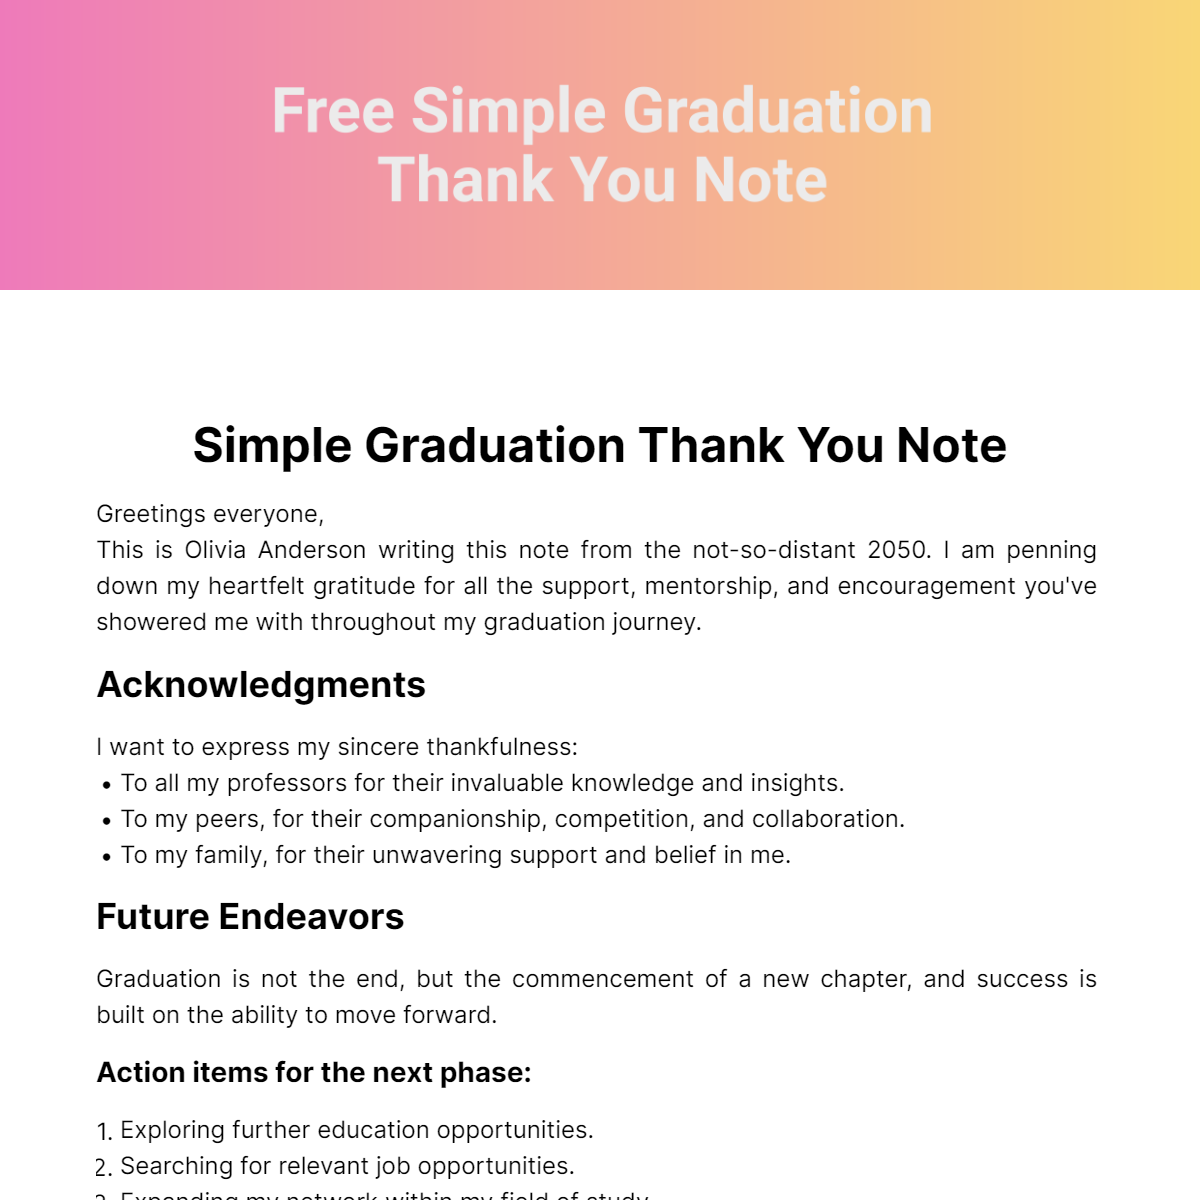 Simple Graduation Thank you Note Template